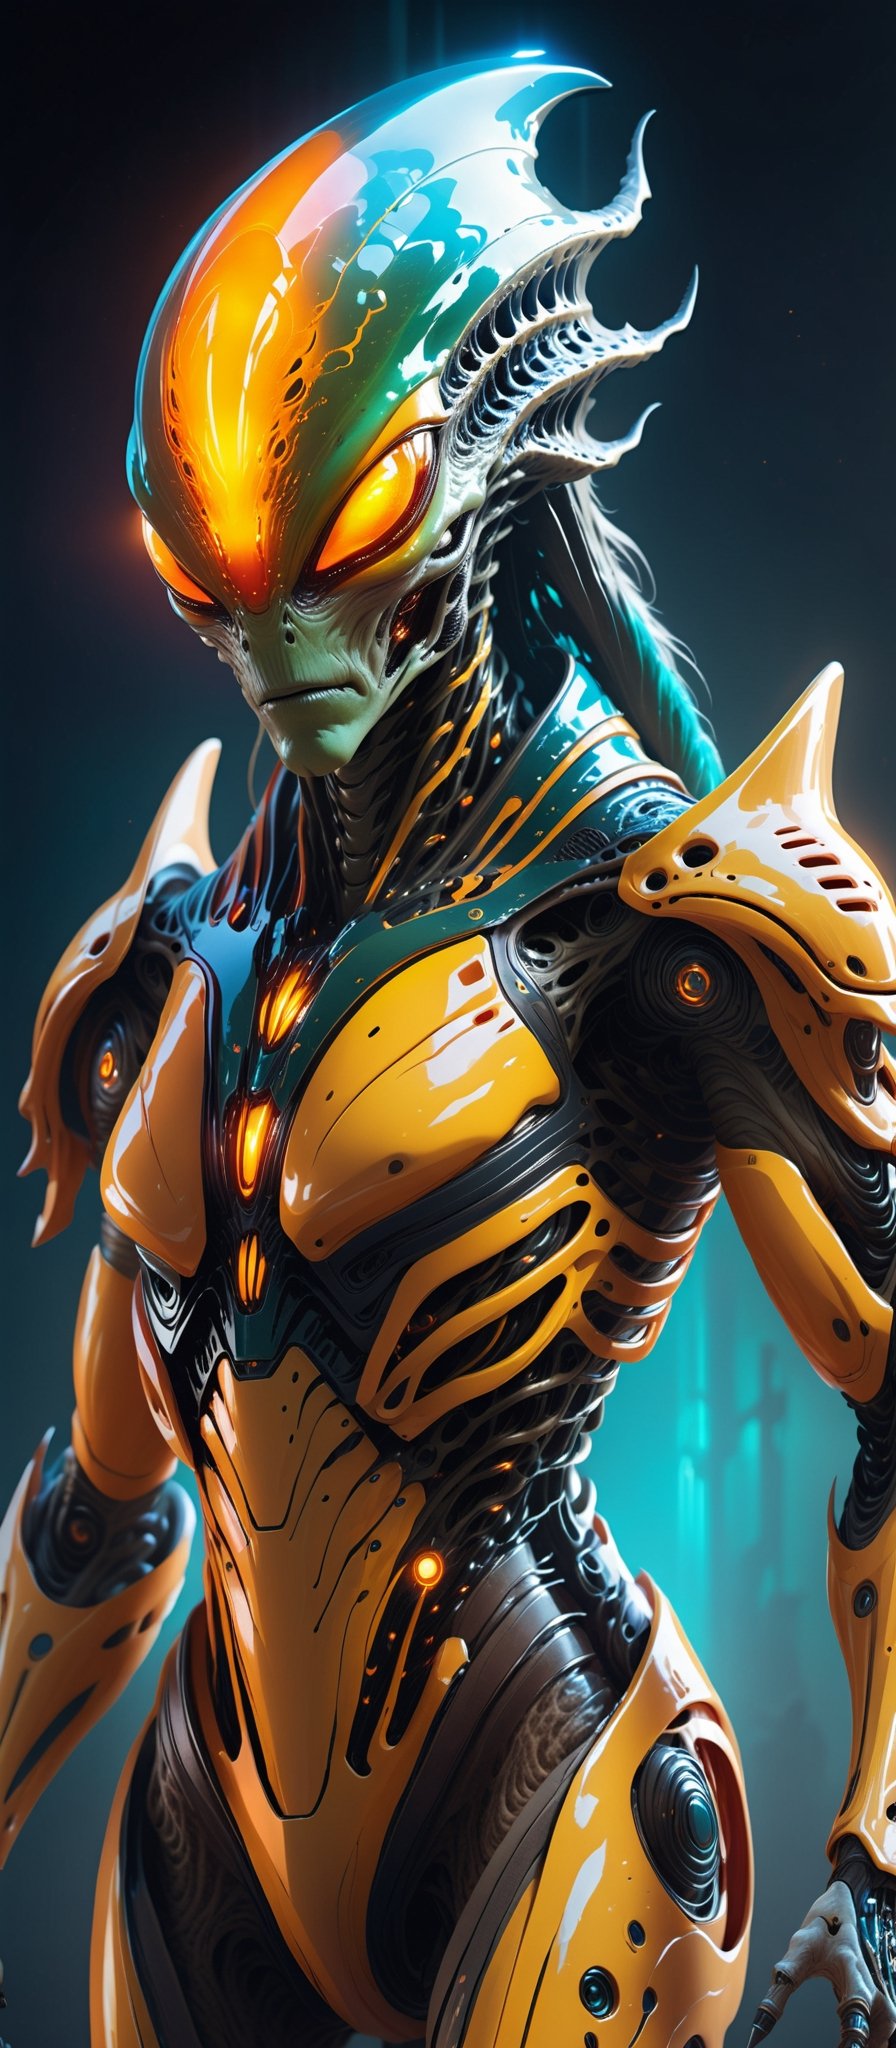 Create a spine-chilling image of an alien creature adorned in Hi-Tech biometric glowing armor, radiating a deadly and intimidating aura. Showcase the alien's otherworldly features and cutting-edge technology, resulting in a mesmerizing and frightening visual narrative. ((Full body)), 